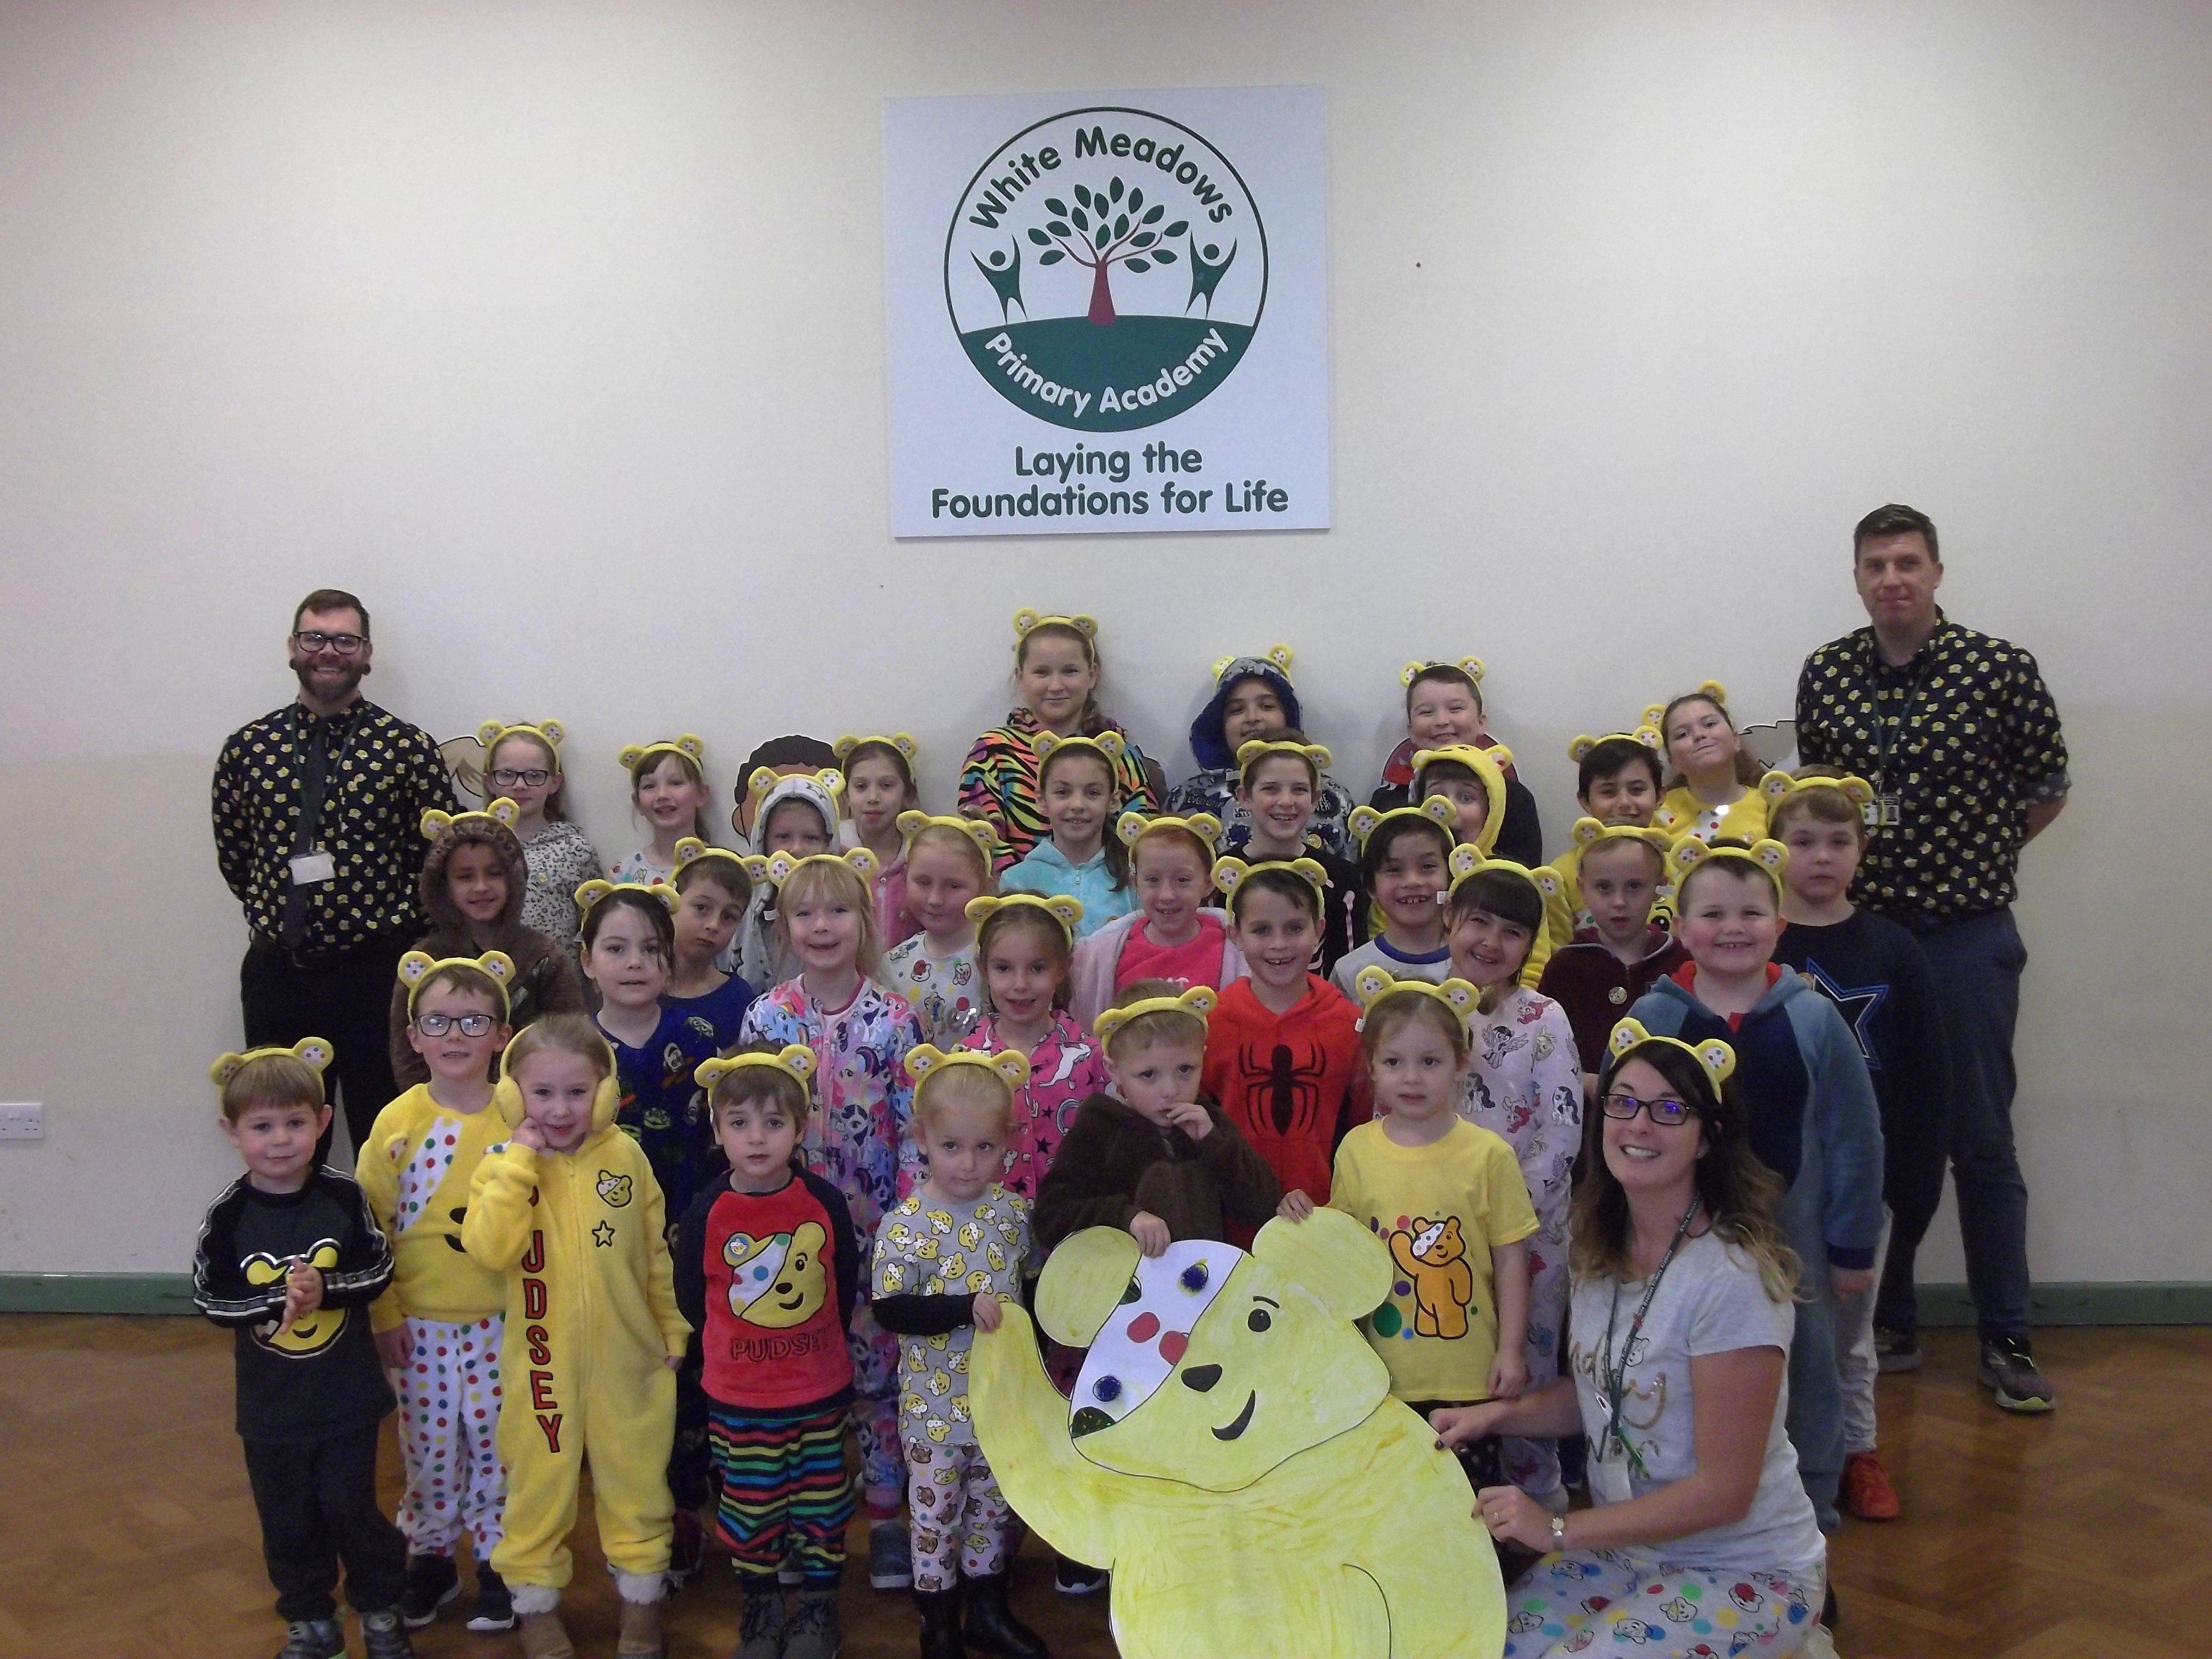 Dressed in pyjamas and spots at White Meadows Primary Academy for Children in Need